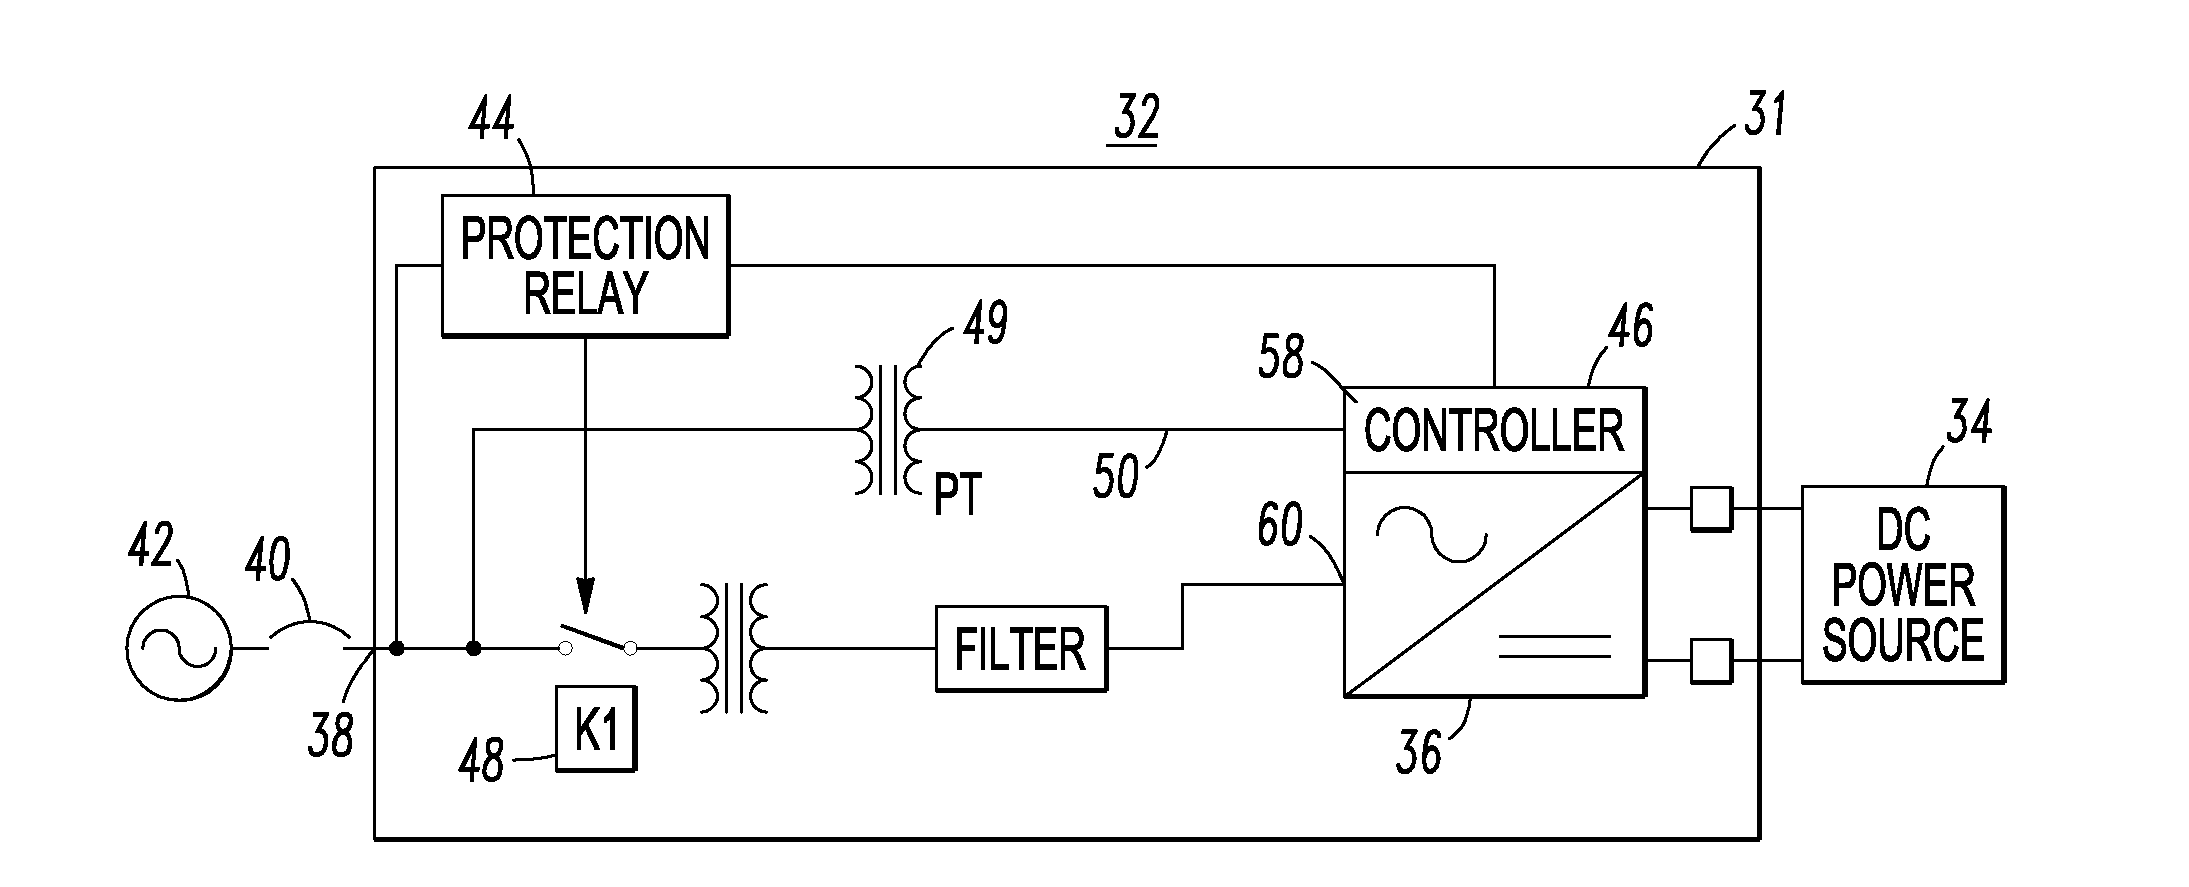 Method and area electric power system detecting islanding by employing controlled reactive power injection by a number of inverters